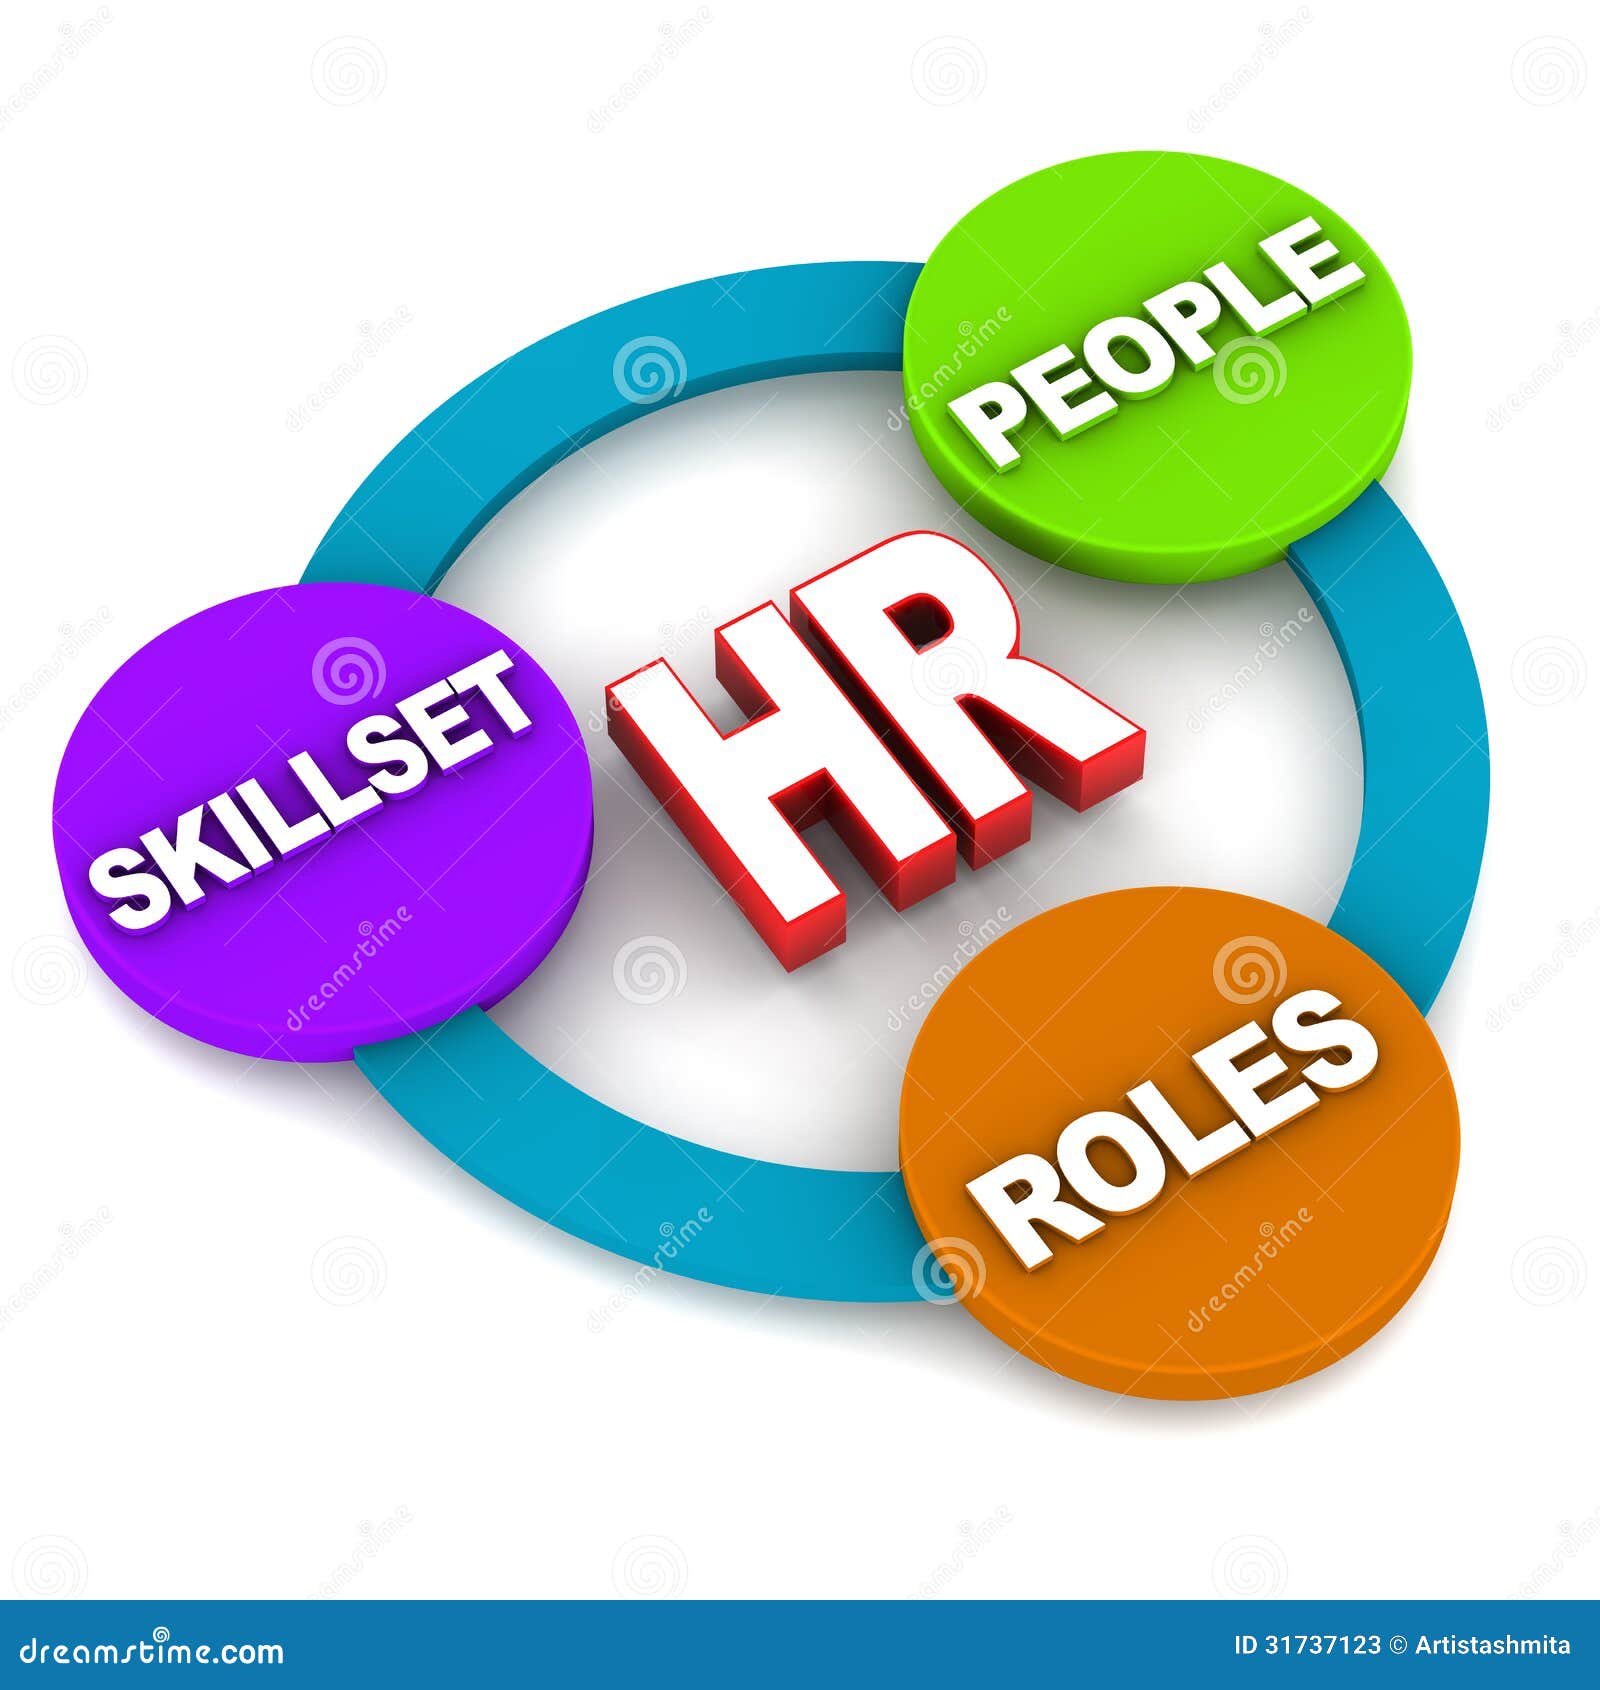 clipart of human resources - photo #19